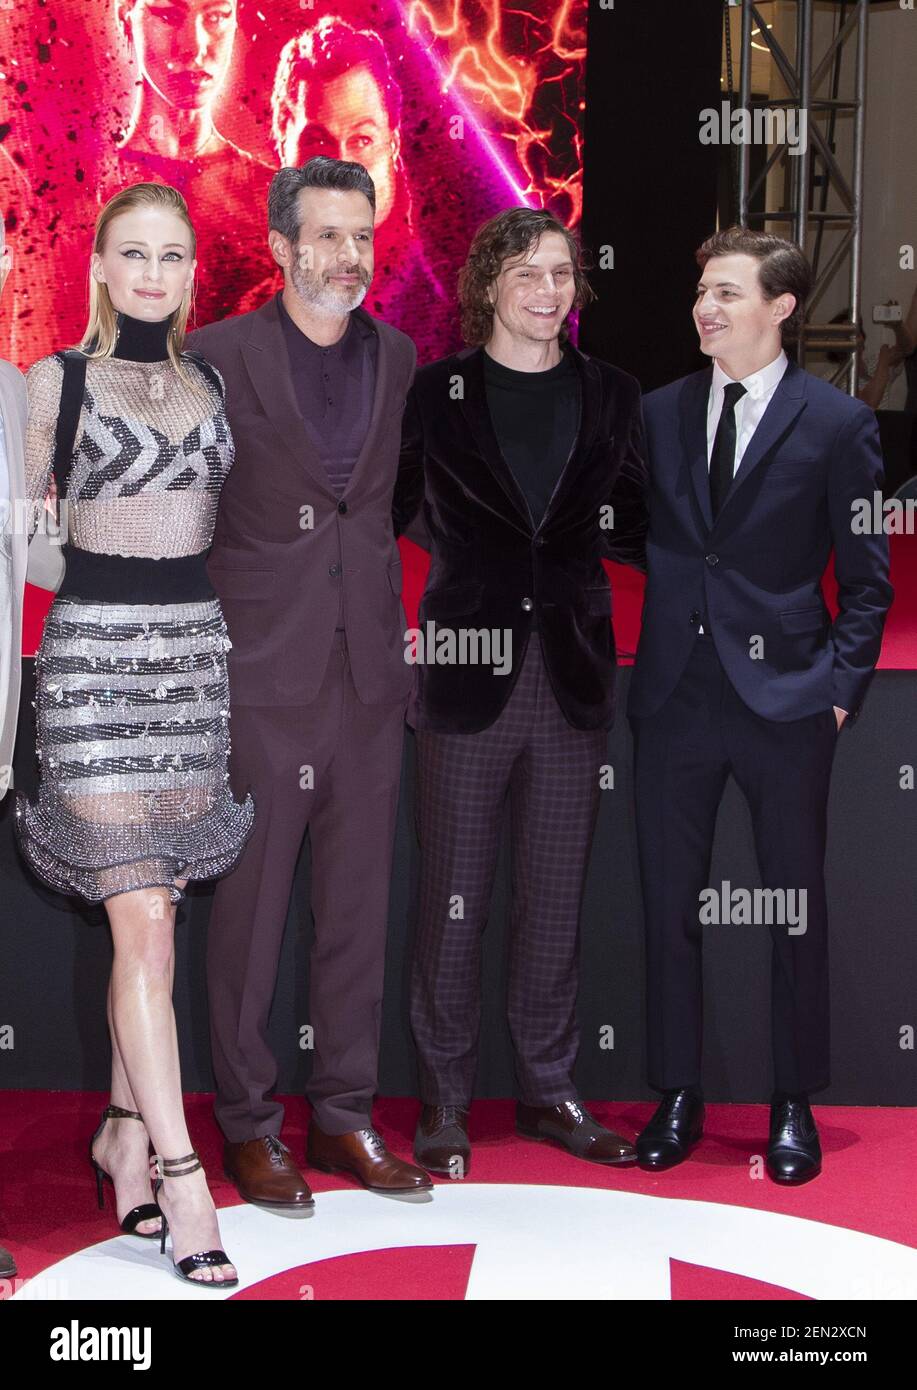 L to R) Actress Sophie Turner, actor Evan Peters, director Simon Kinberg,  Michael Fassbender and actor Tye Sheridan, attend a red carpet for the film  X-Man: Dark Phoenix world premiere at the